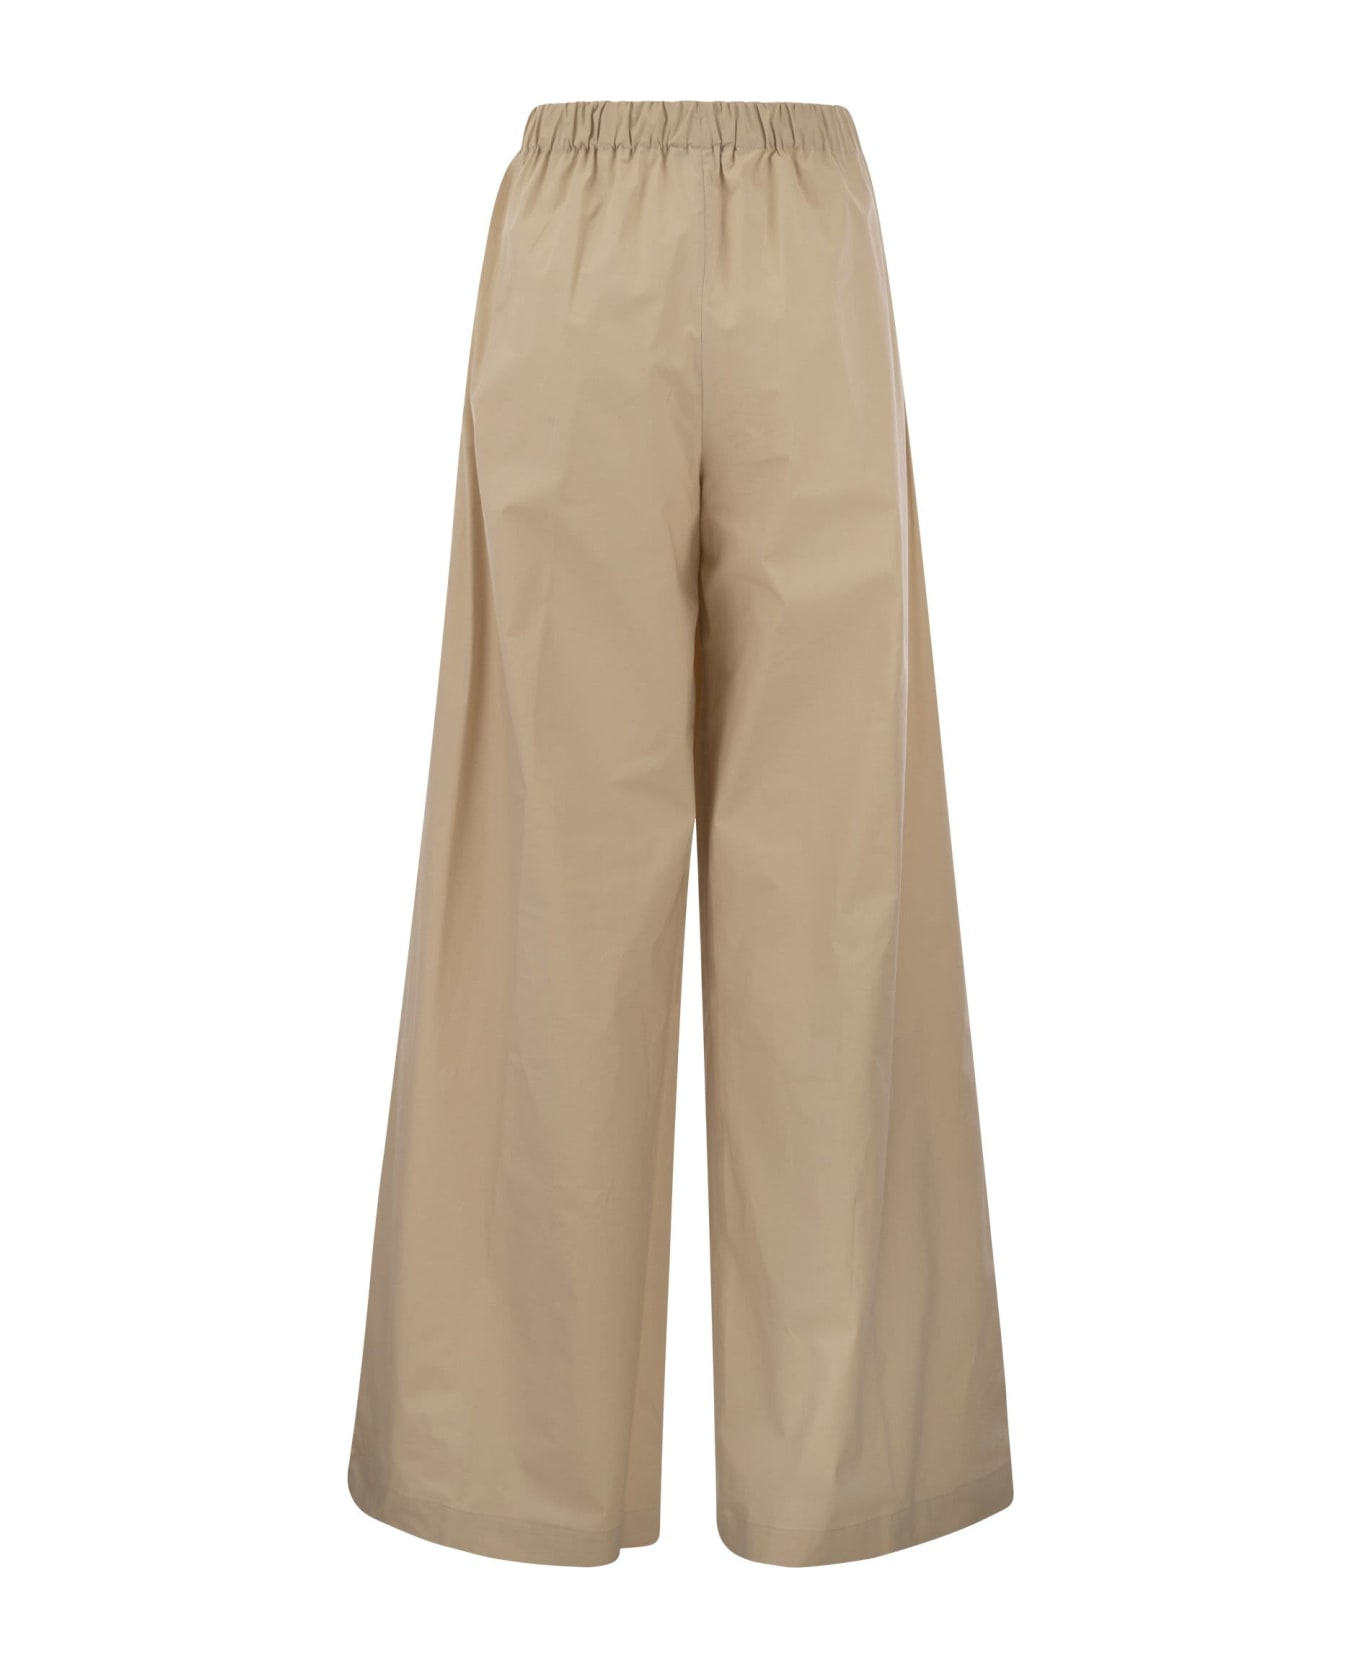 Antonelli Steven - Stretch Cotton Loose-fitting Trousers - Beige ボトムス